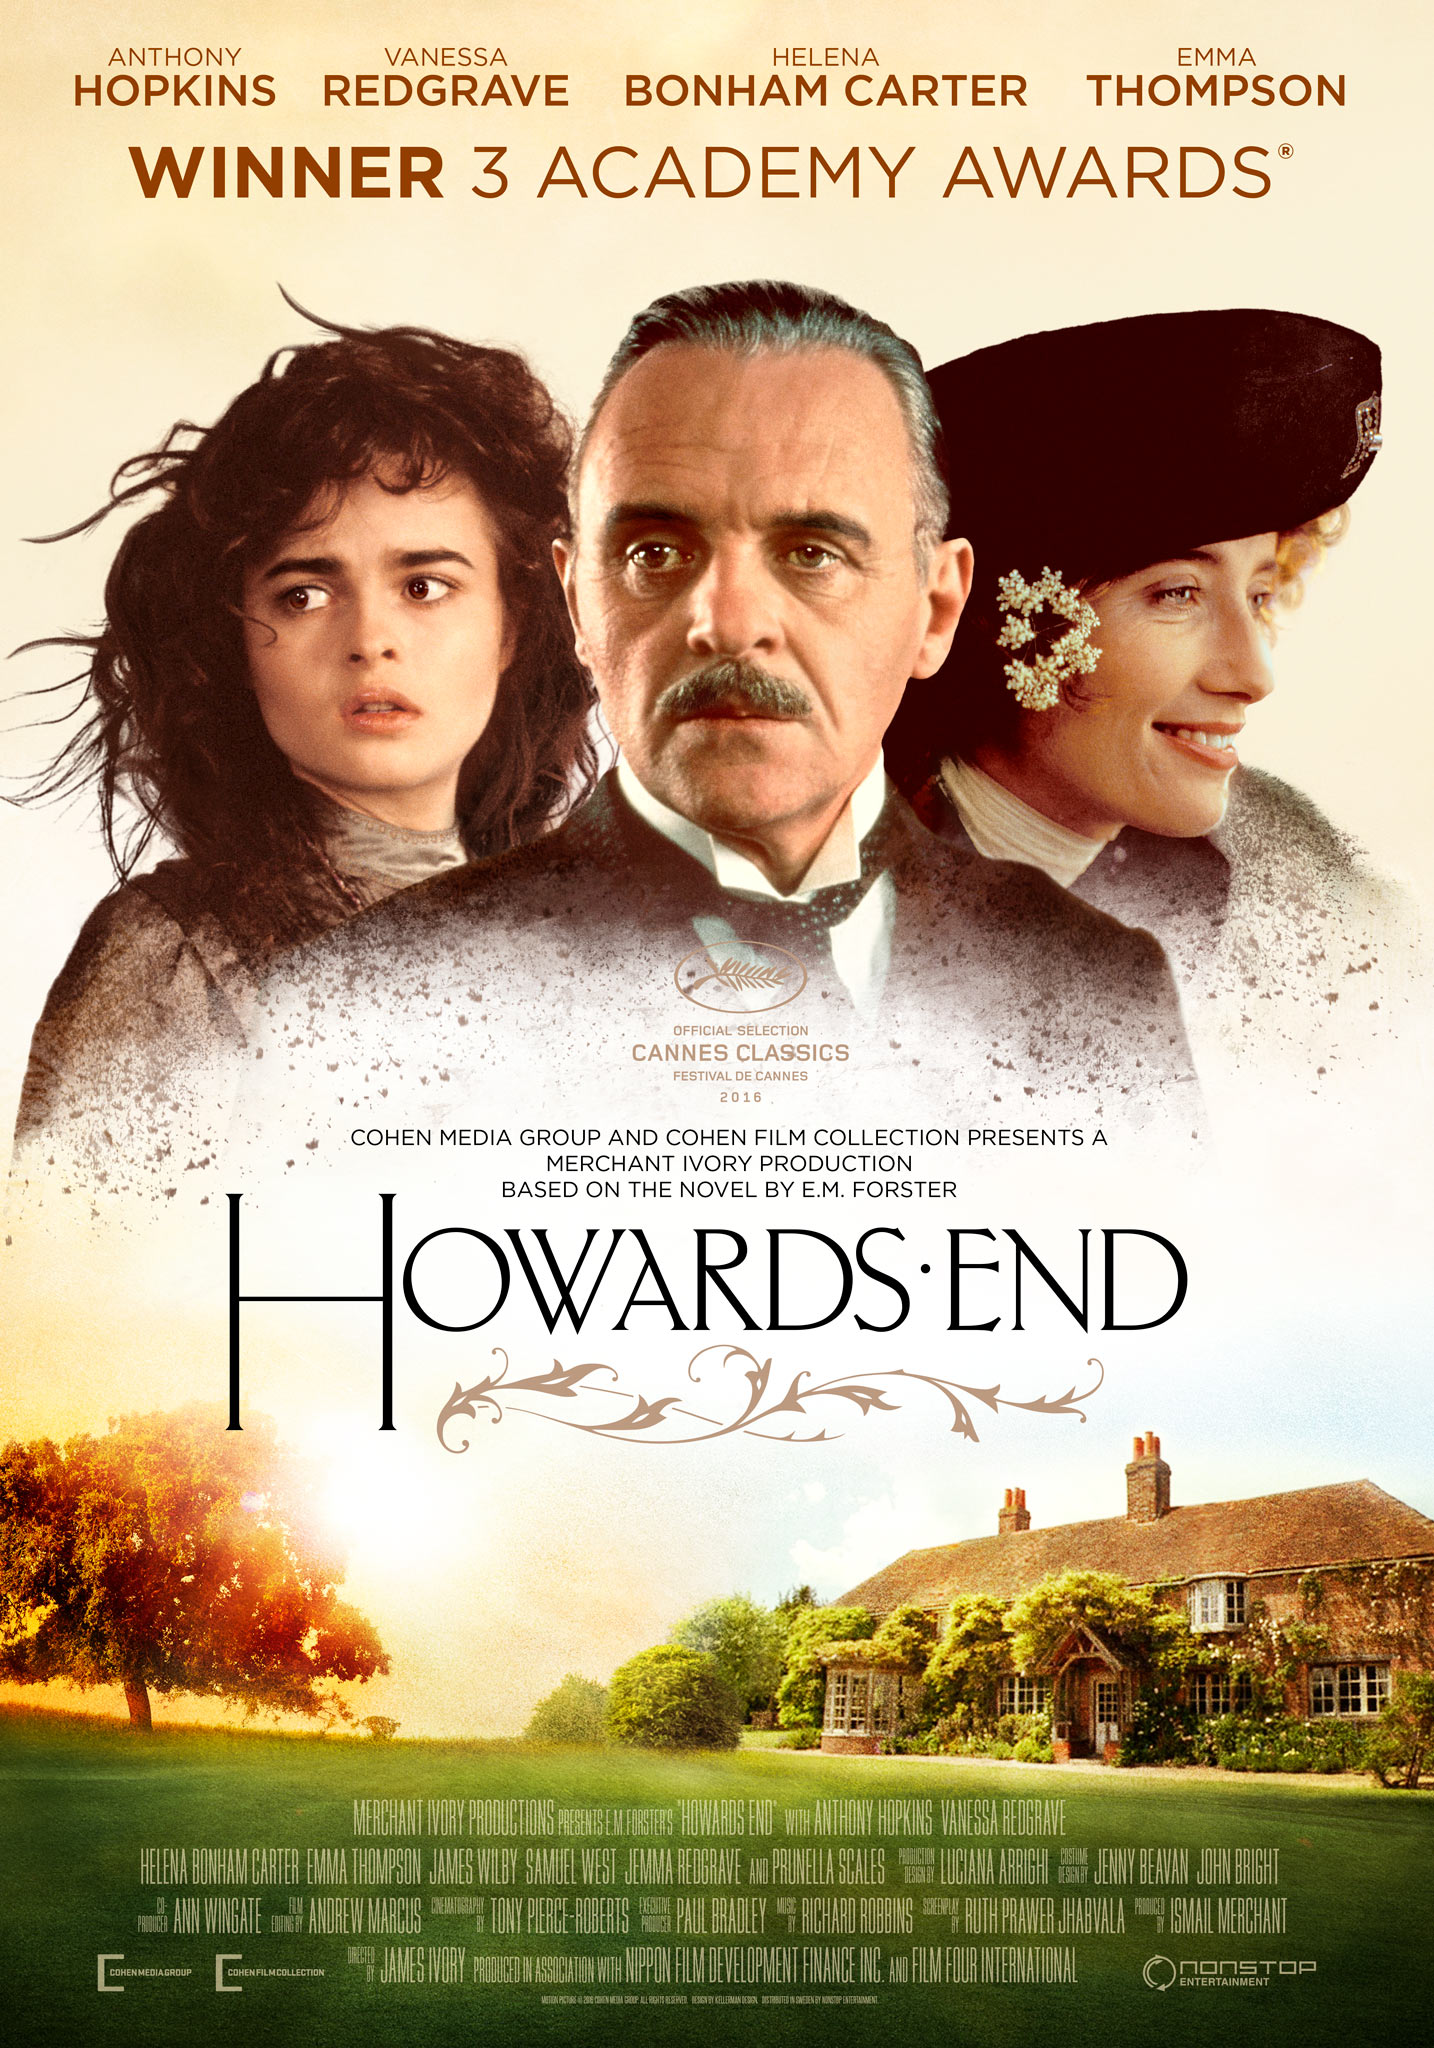 Howards End (1992) theatrical onesheet